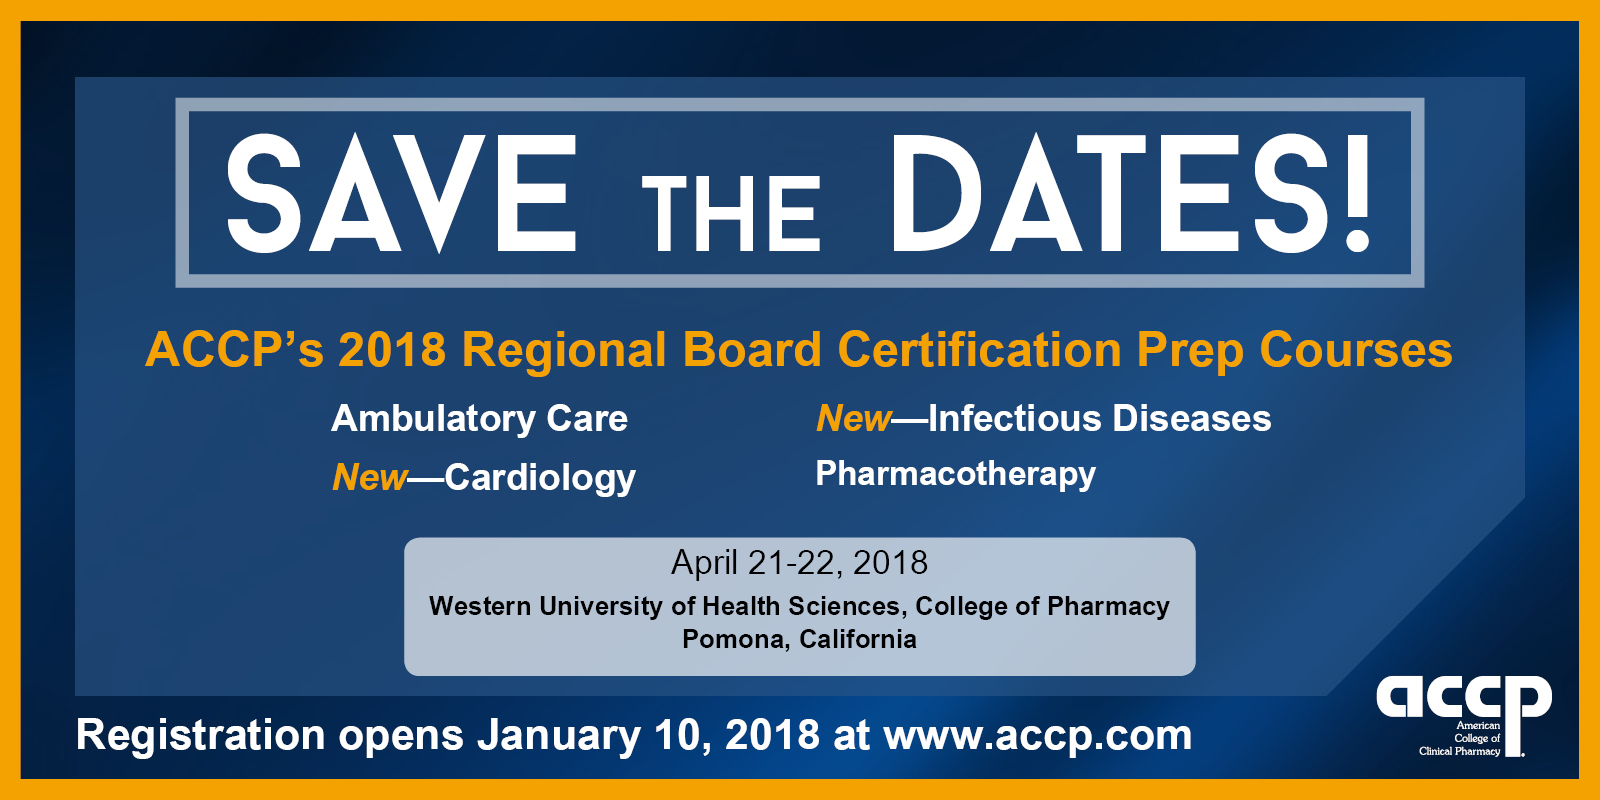 Registration Opens January 2018 for ACCP Regional Board Certification Prep Courses